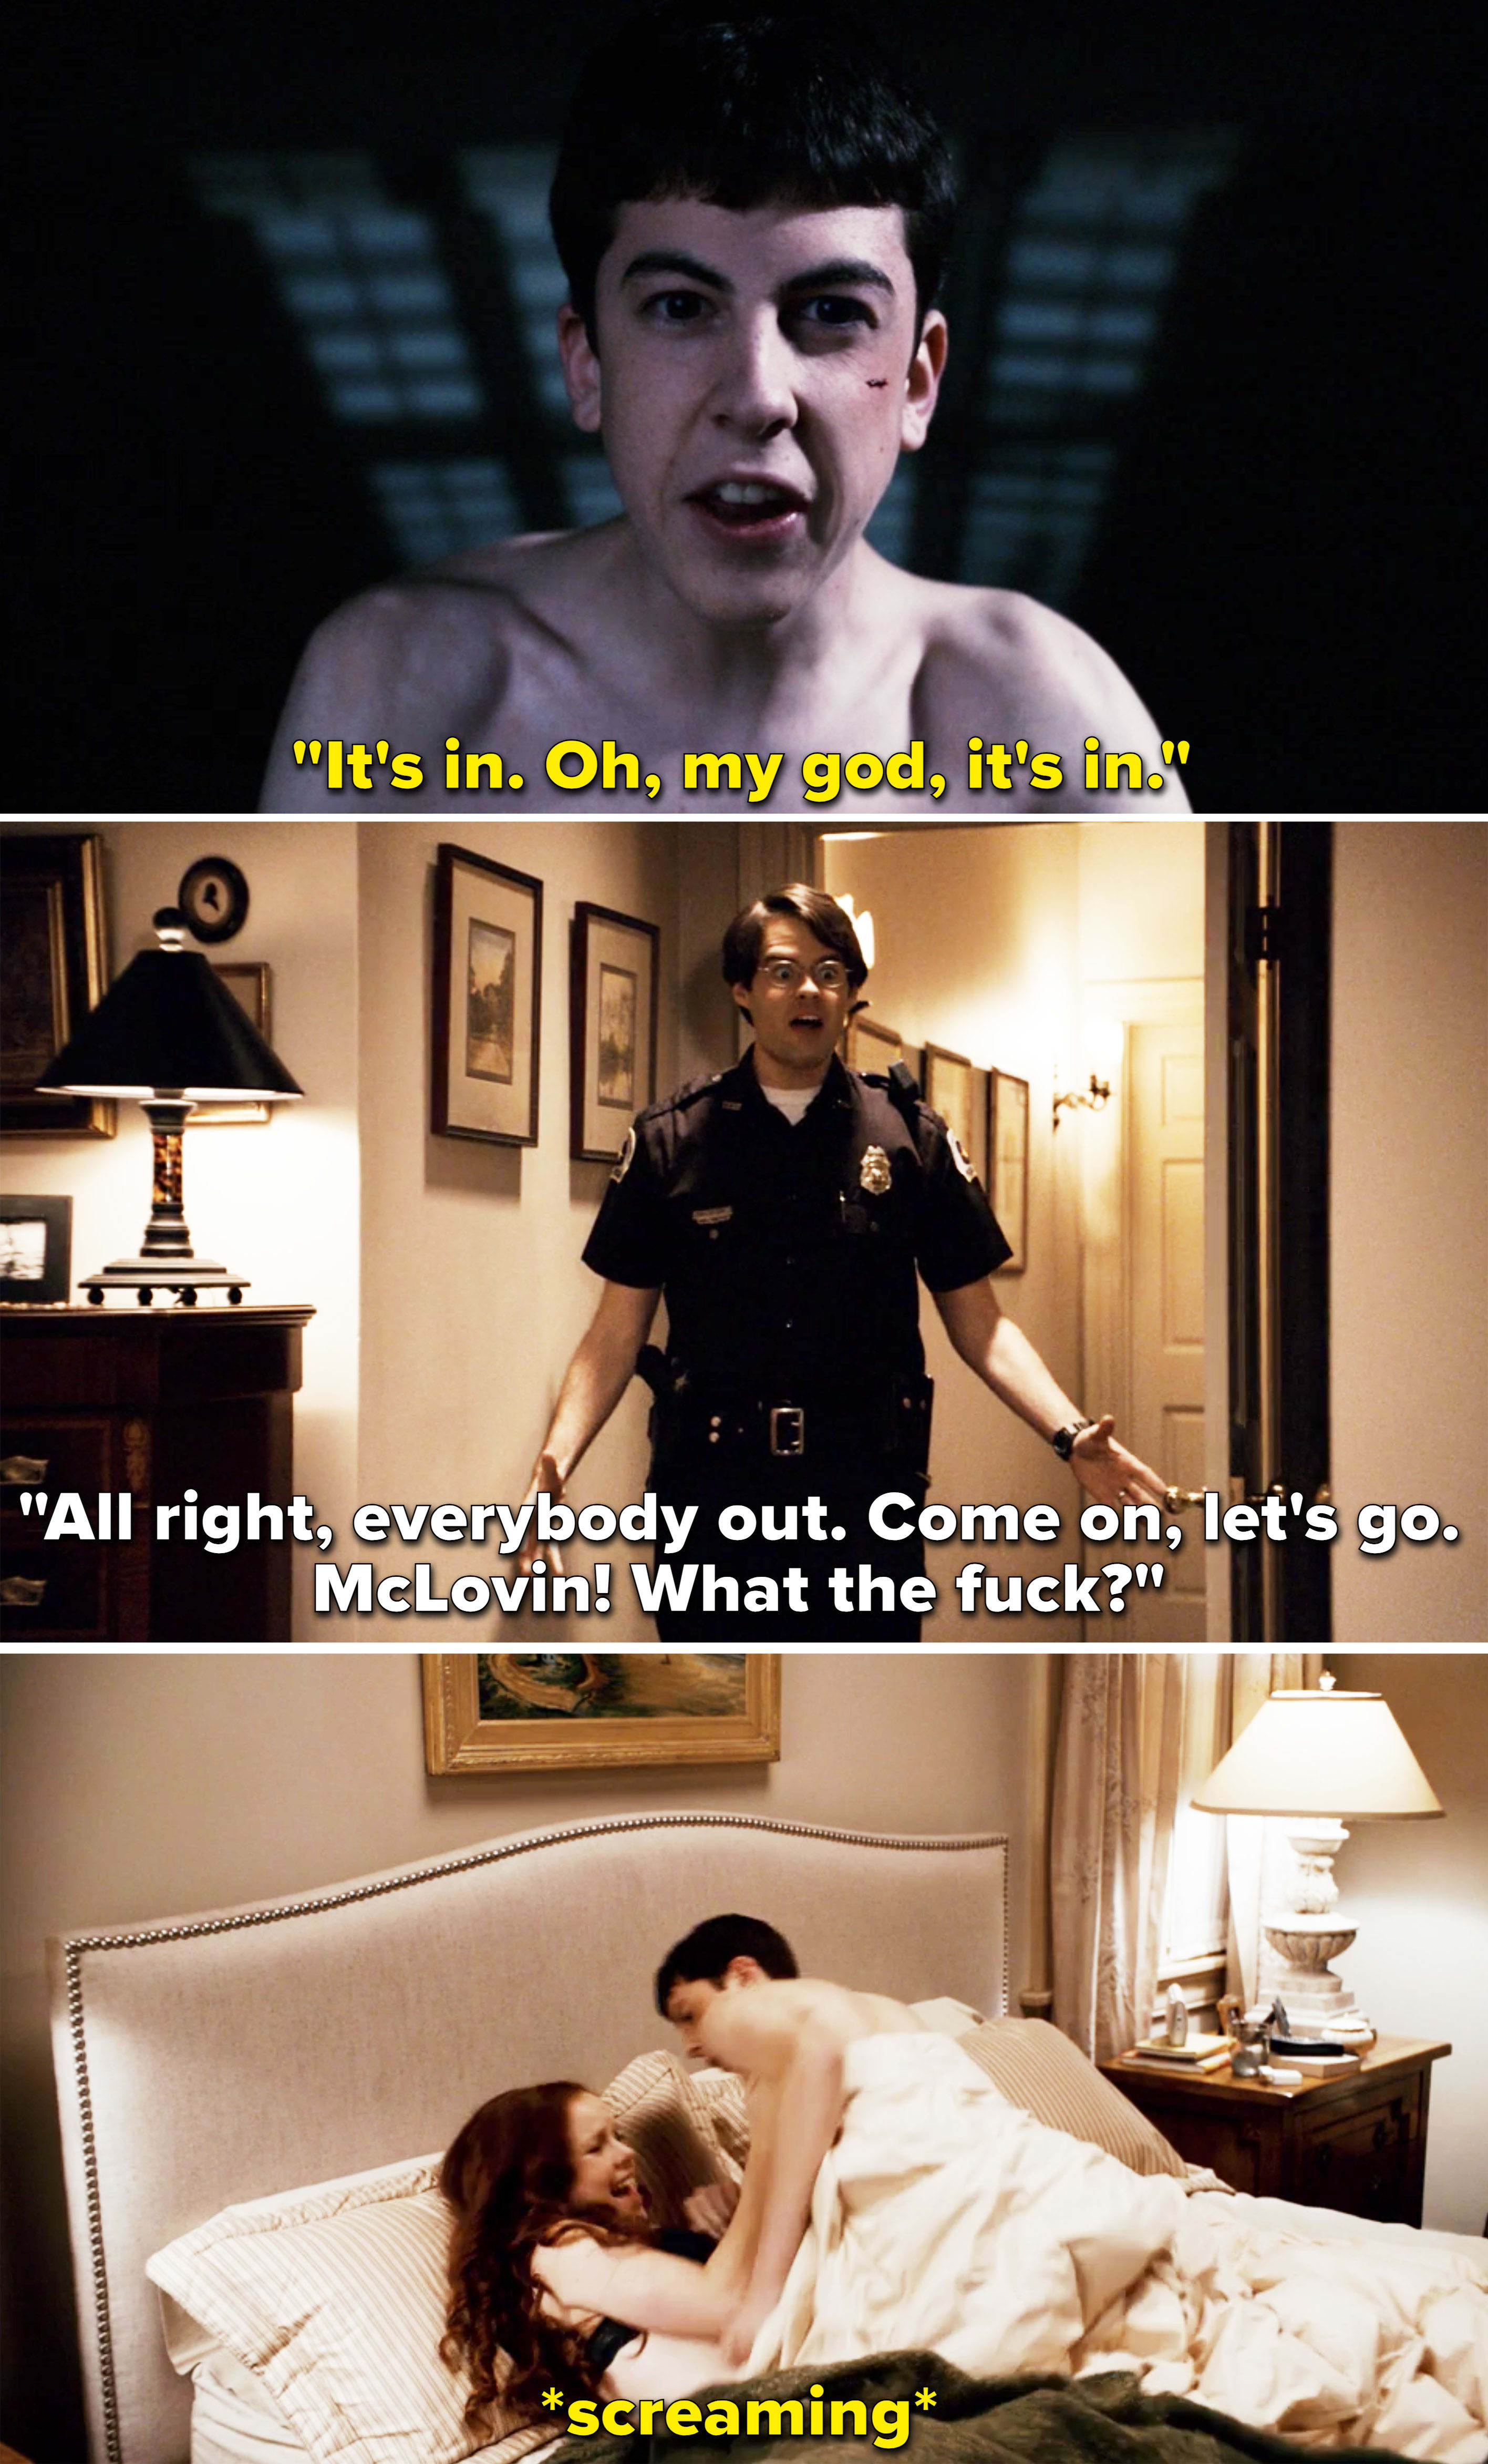 McLovin saying, "It's in" and the police barging in and McLovin screaming